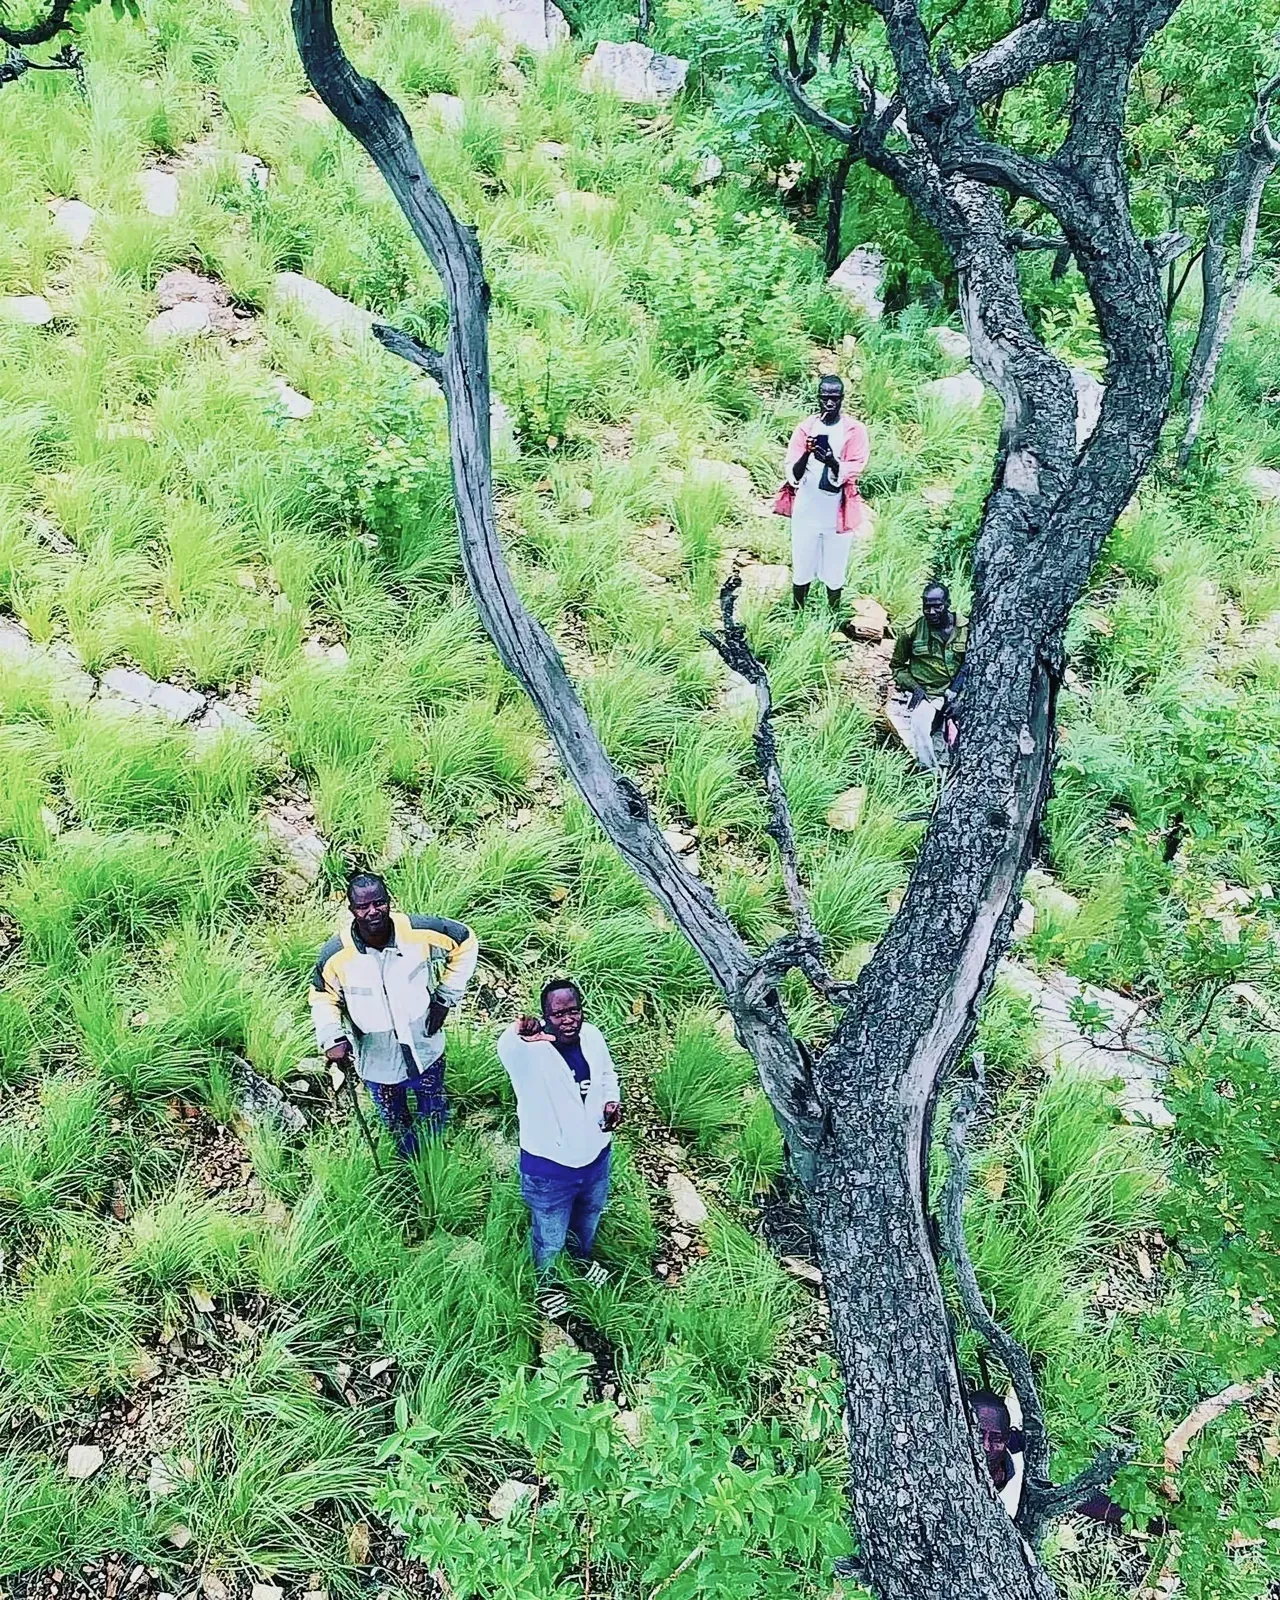 A group of people hiking in a grassy area during the summer season